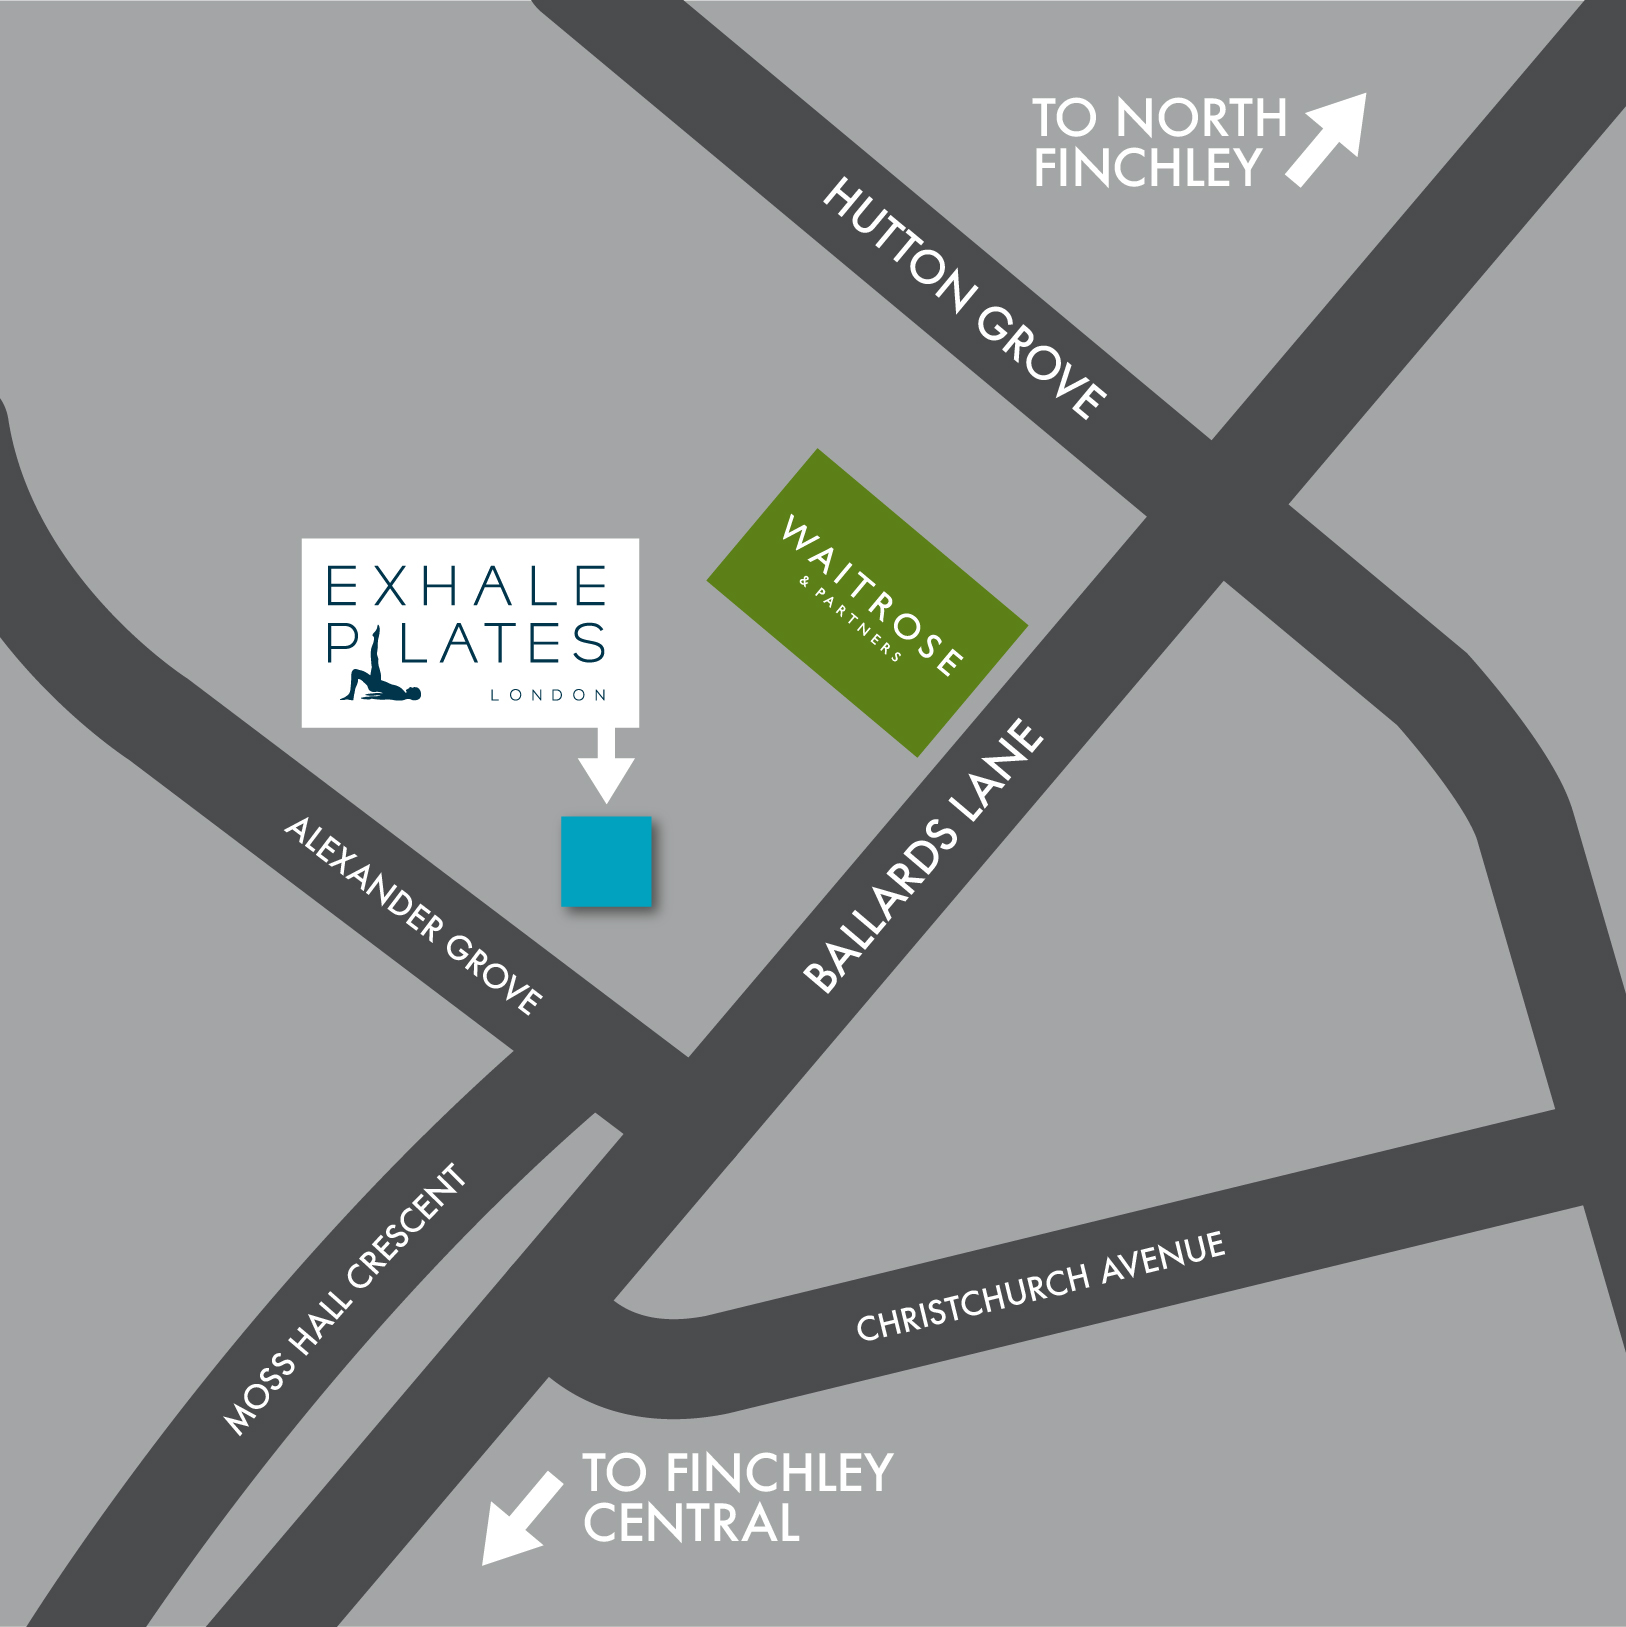 EXHALE PILATES LONDON - North Finchley